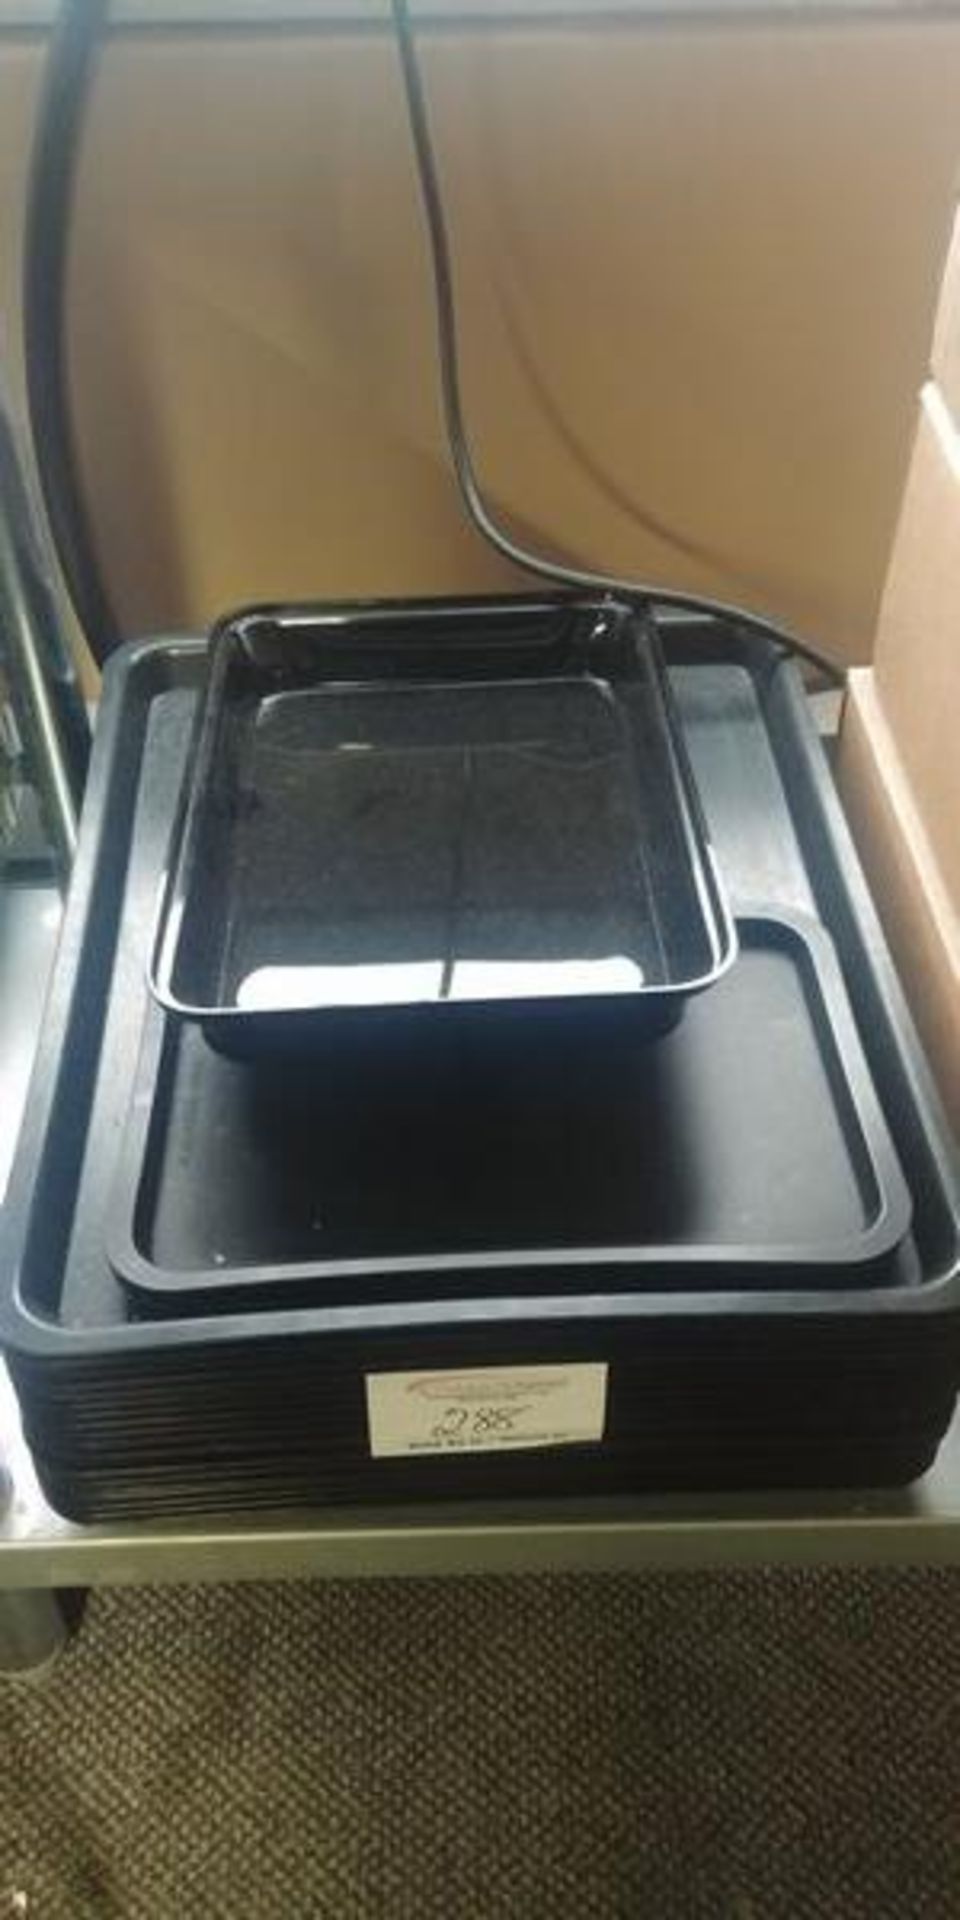 20 Assorted New Black Meat Display Trays